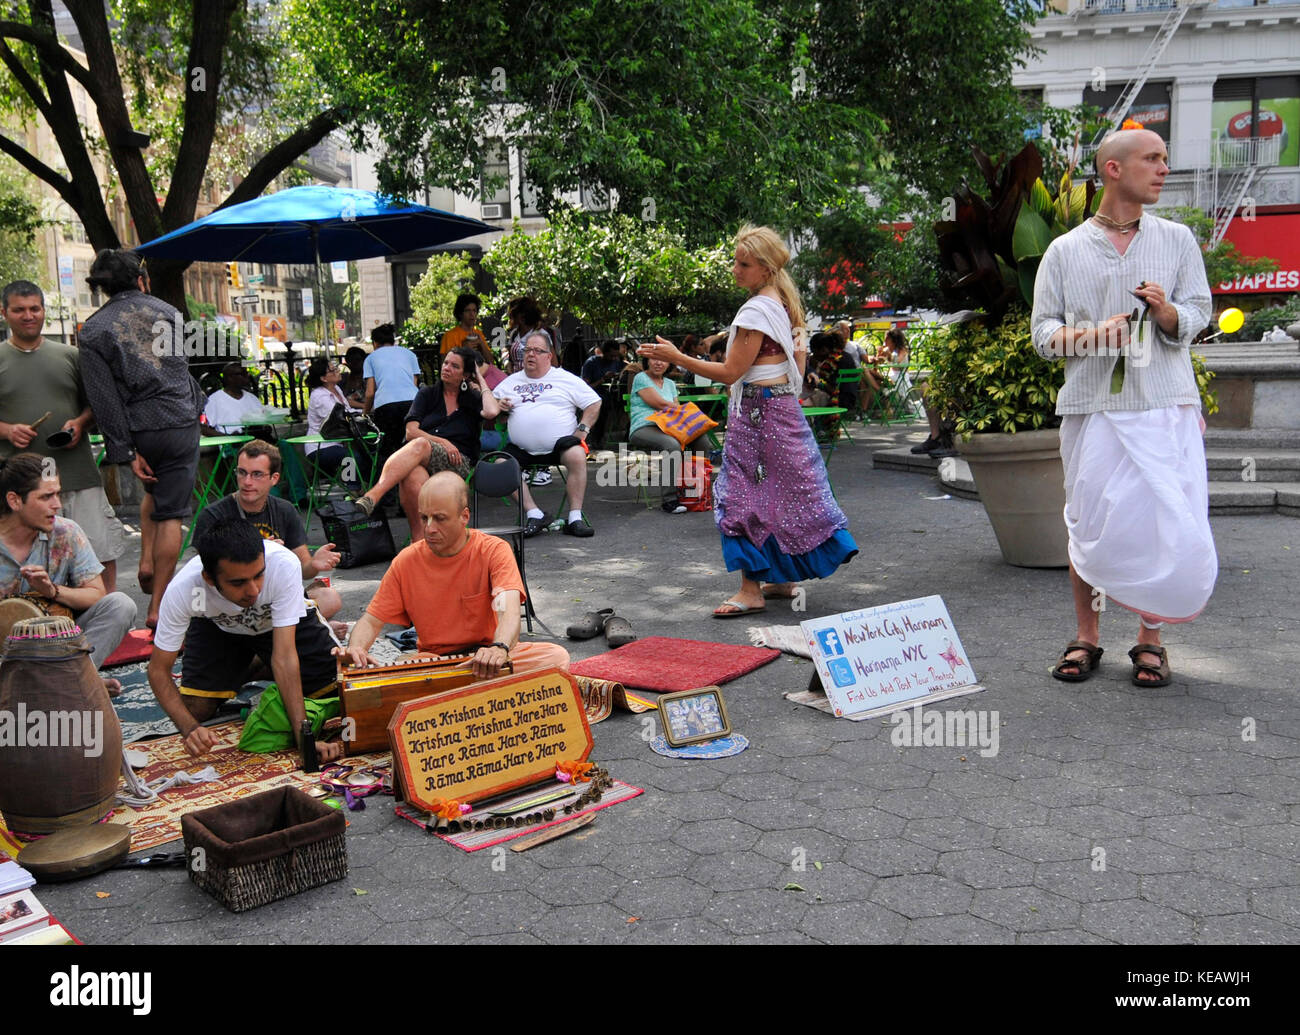 Hare Krishnas singing and dancing in New York's Union Square. Stock Photo